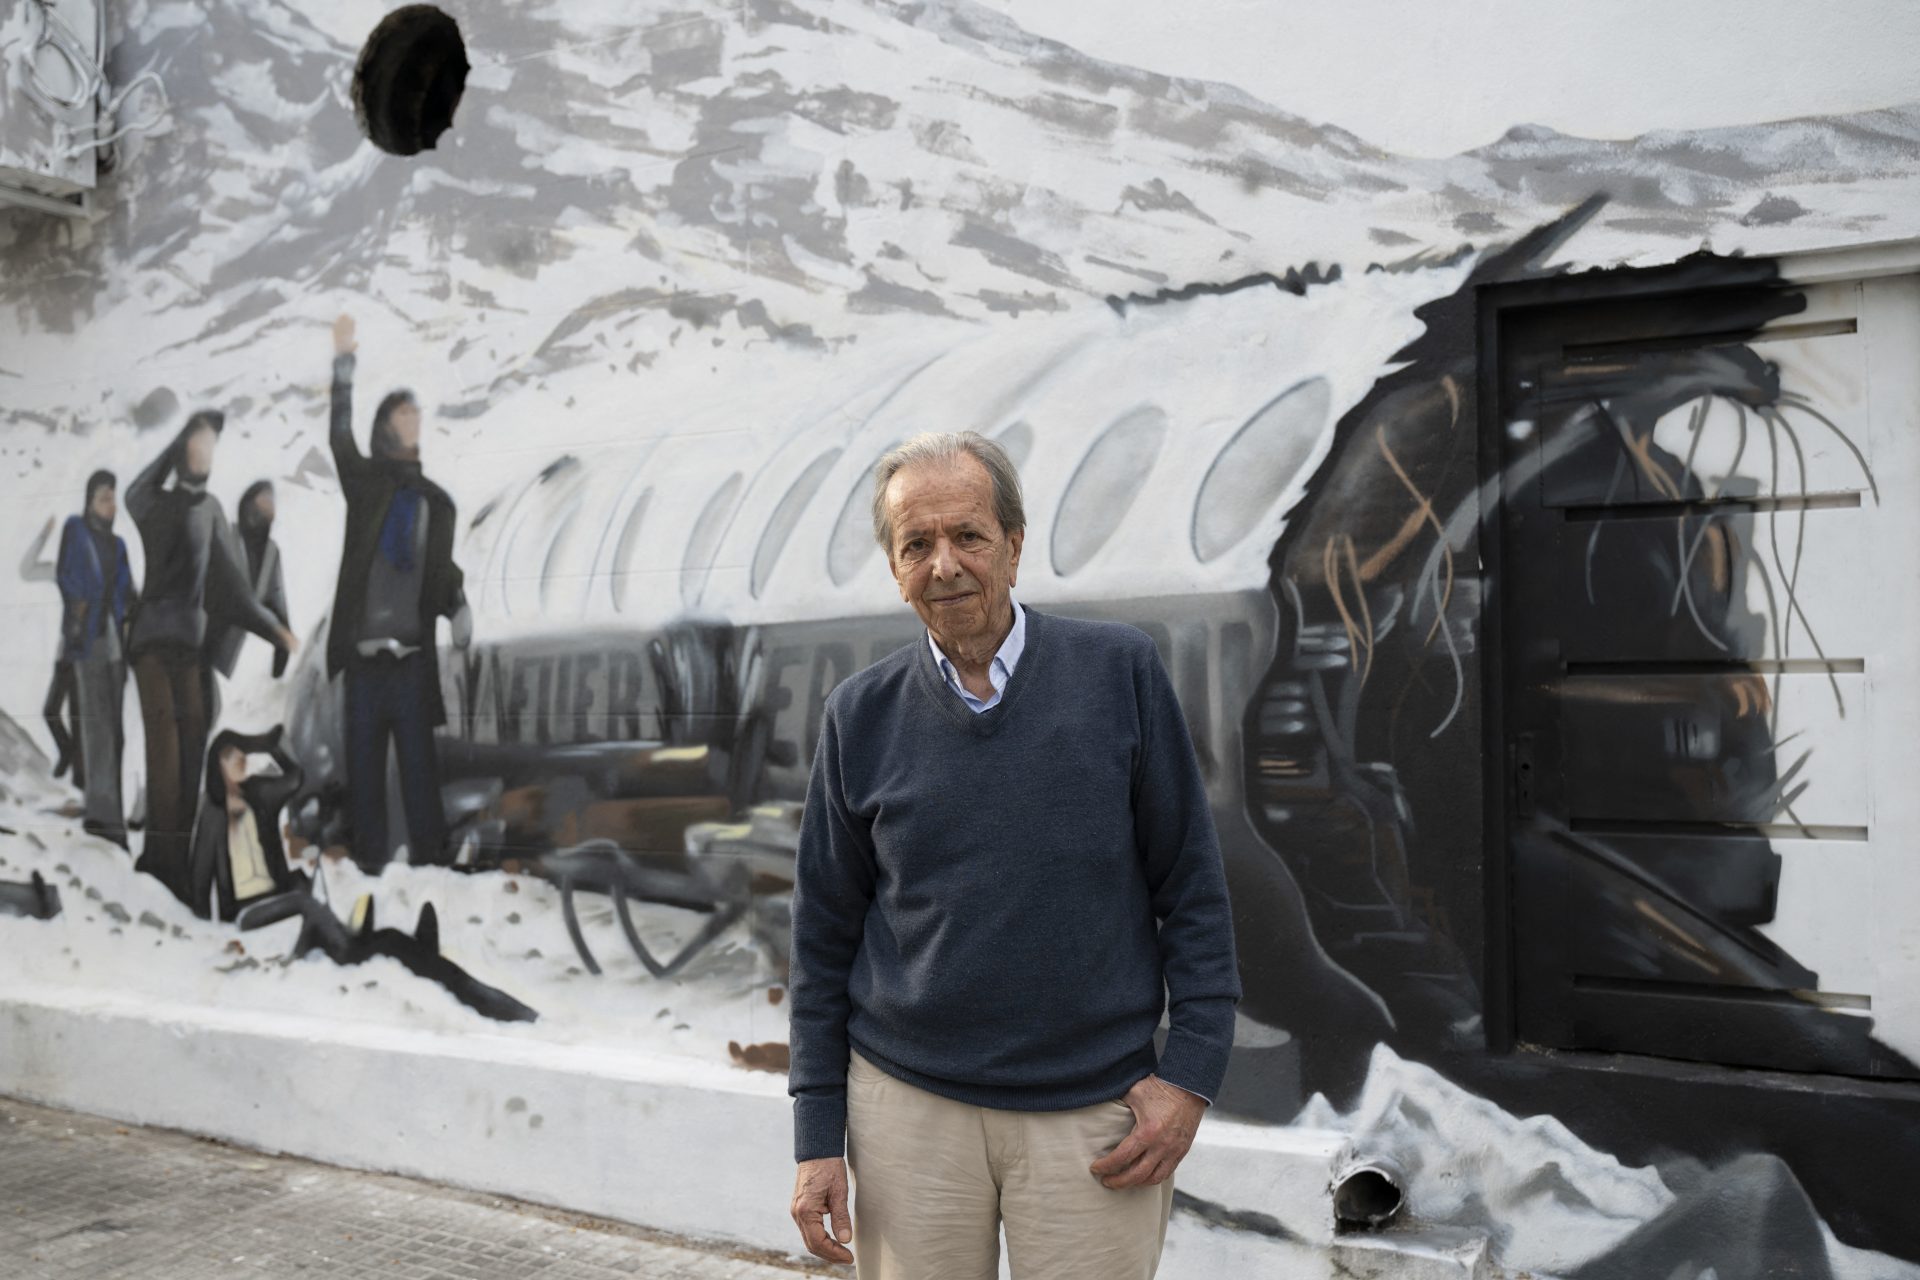 Miracle in the Andes: the survival story from one of the most famous plane crashes